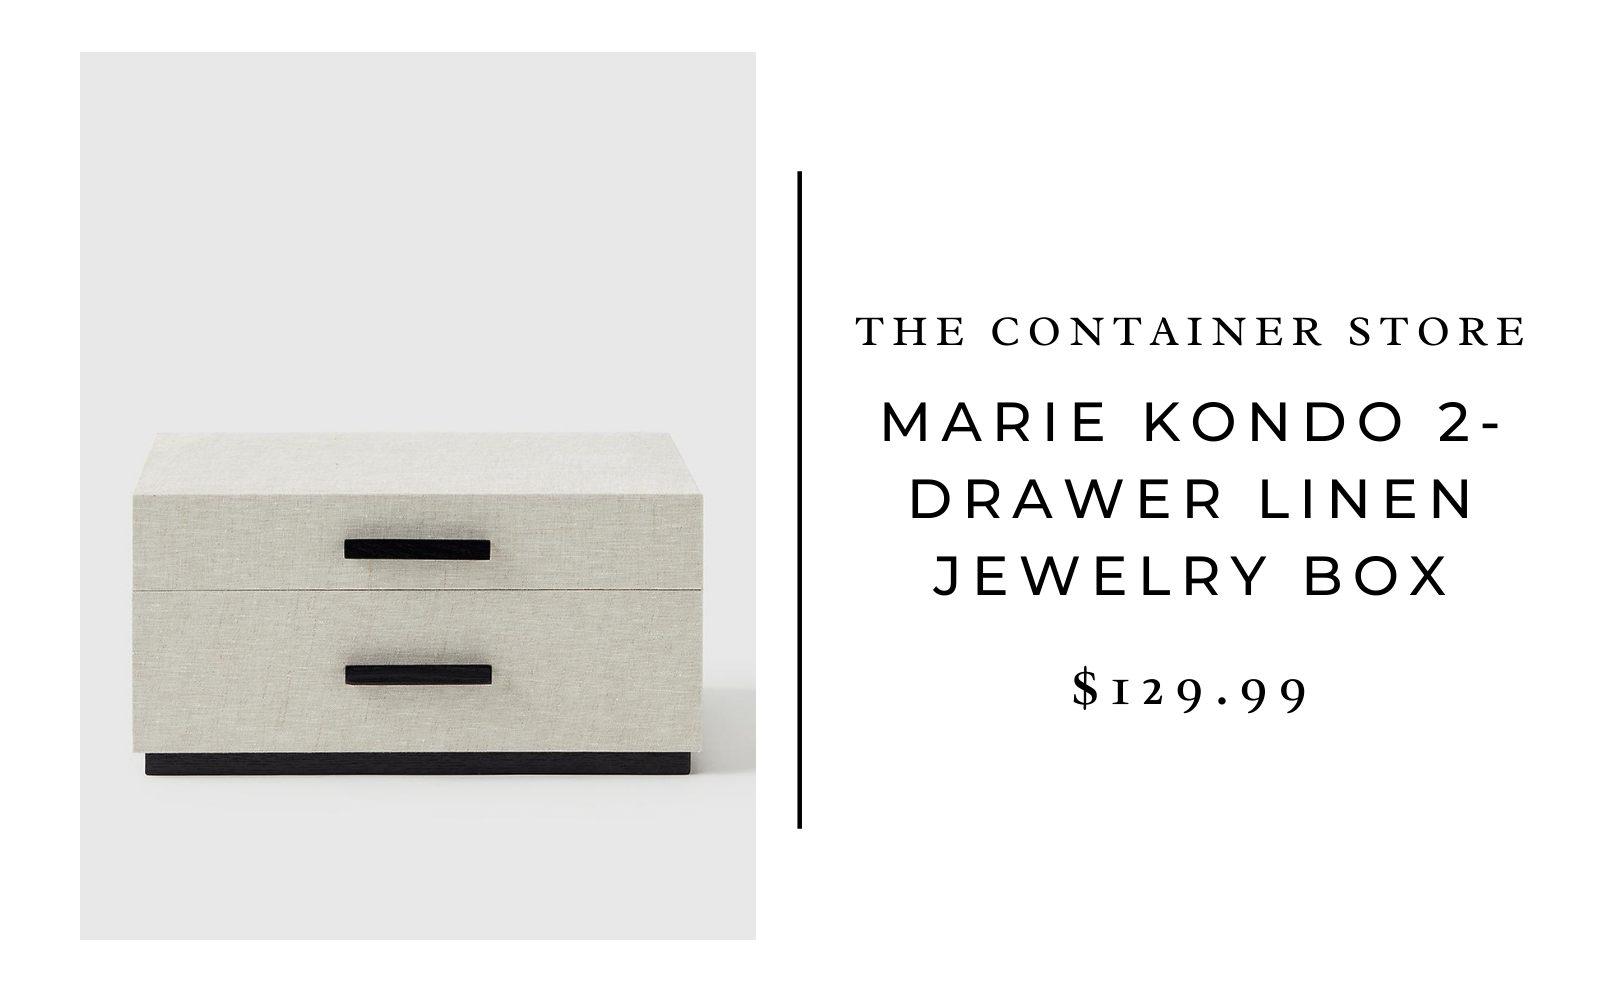 The Container Store Marie Kondo 2-Drawer Linen Jewelry Box